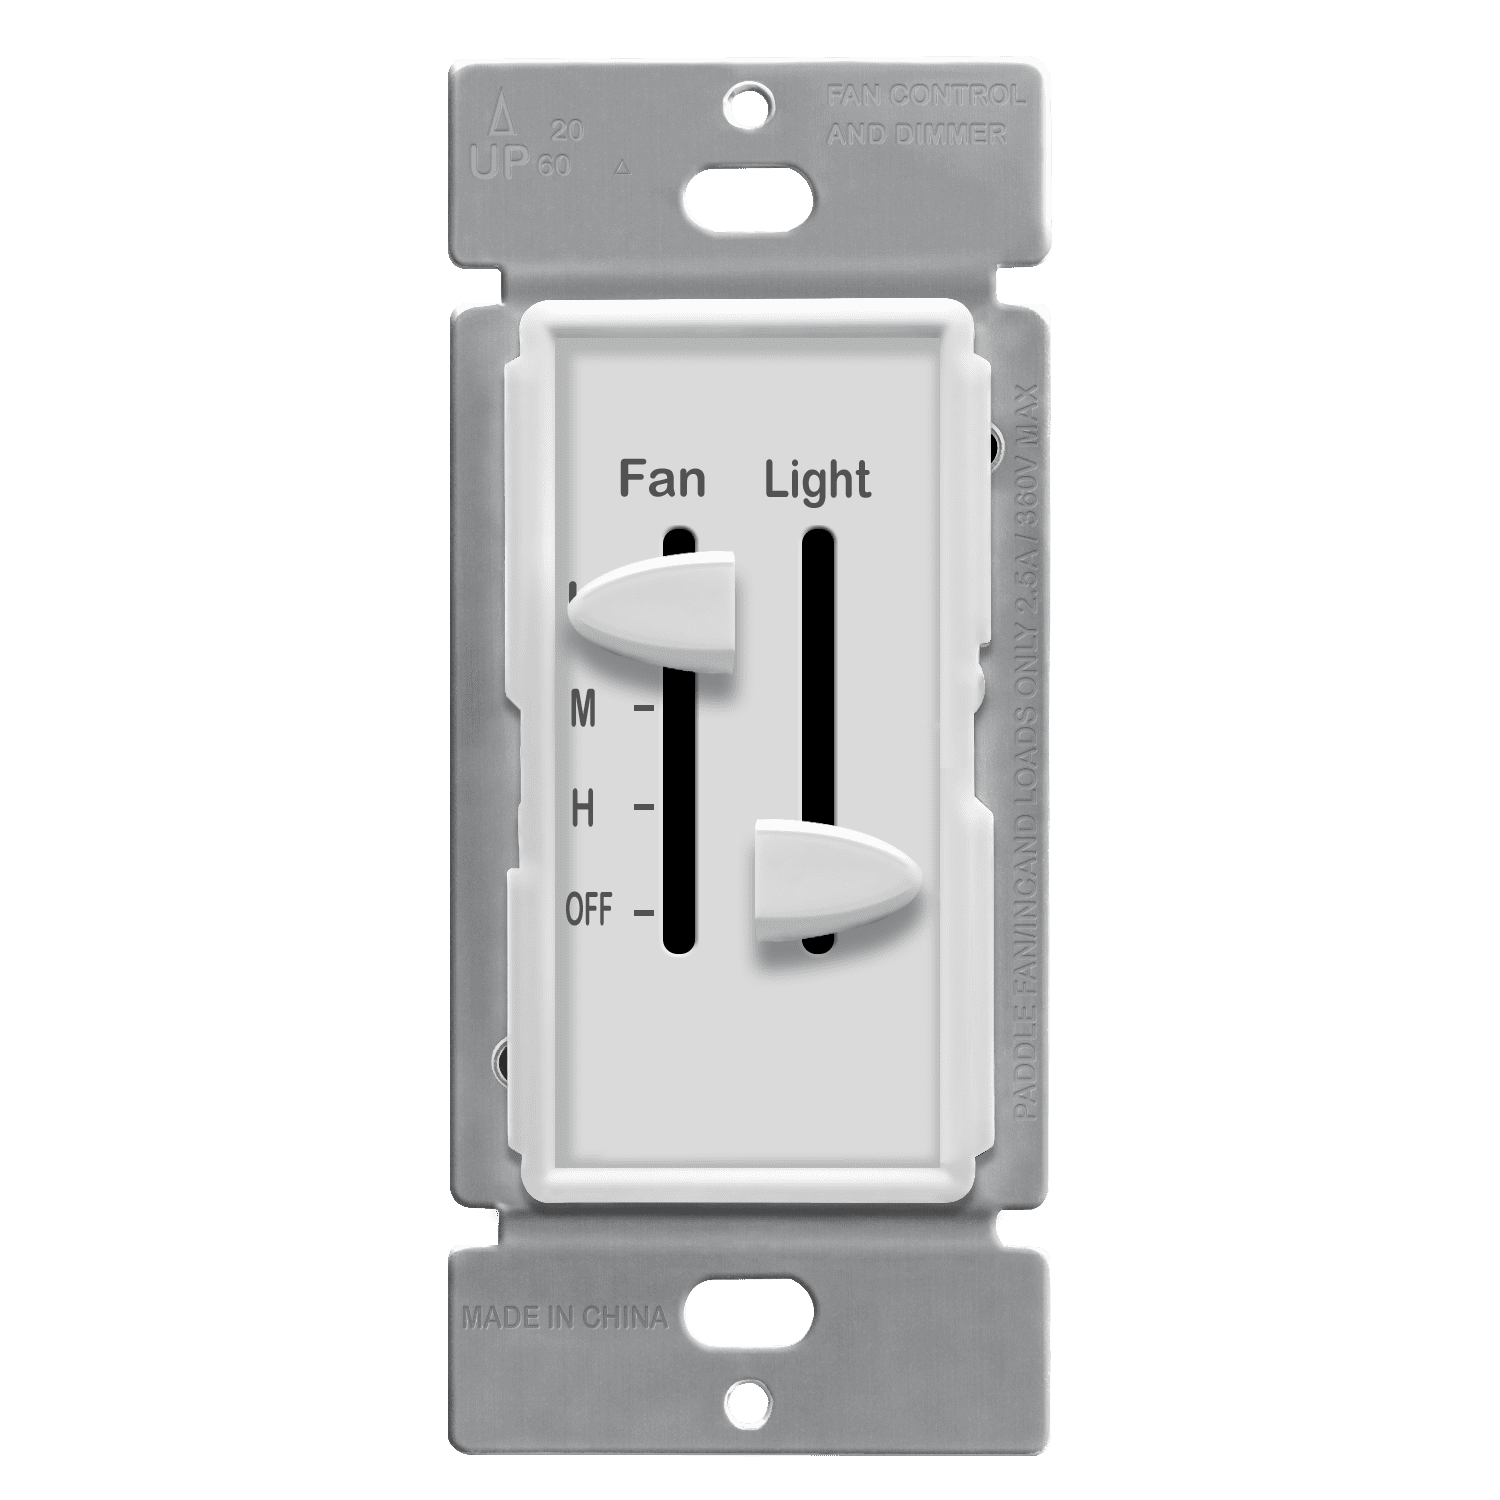 ENERLITES Ceiling Fan Control and LED Dimmer Light Switch, 2.5A Single  Pole. 300W Incandescent Load, No Neutral Wire Required, 17001-F3-W, White 